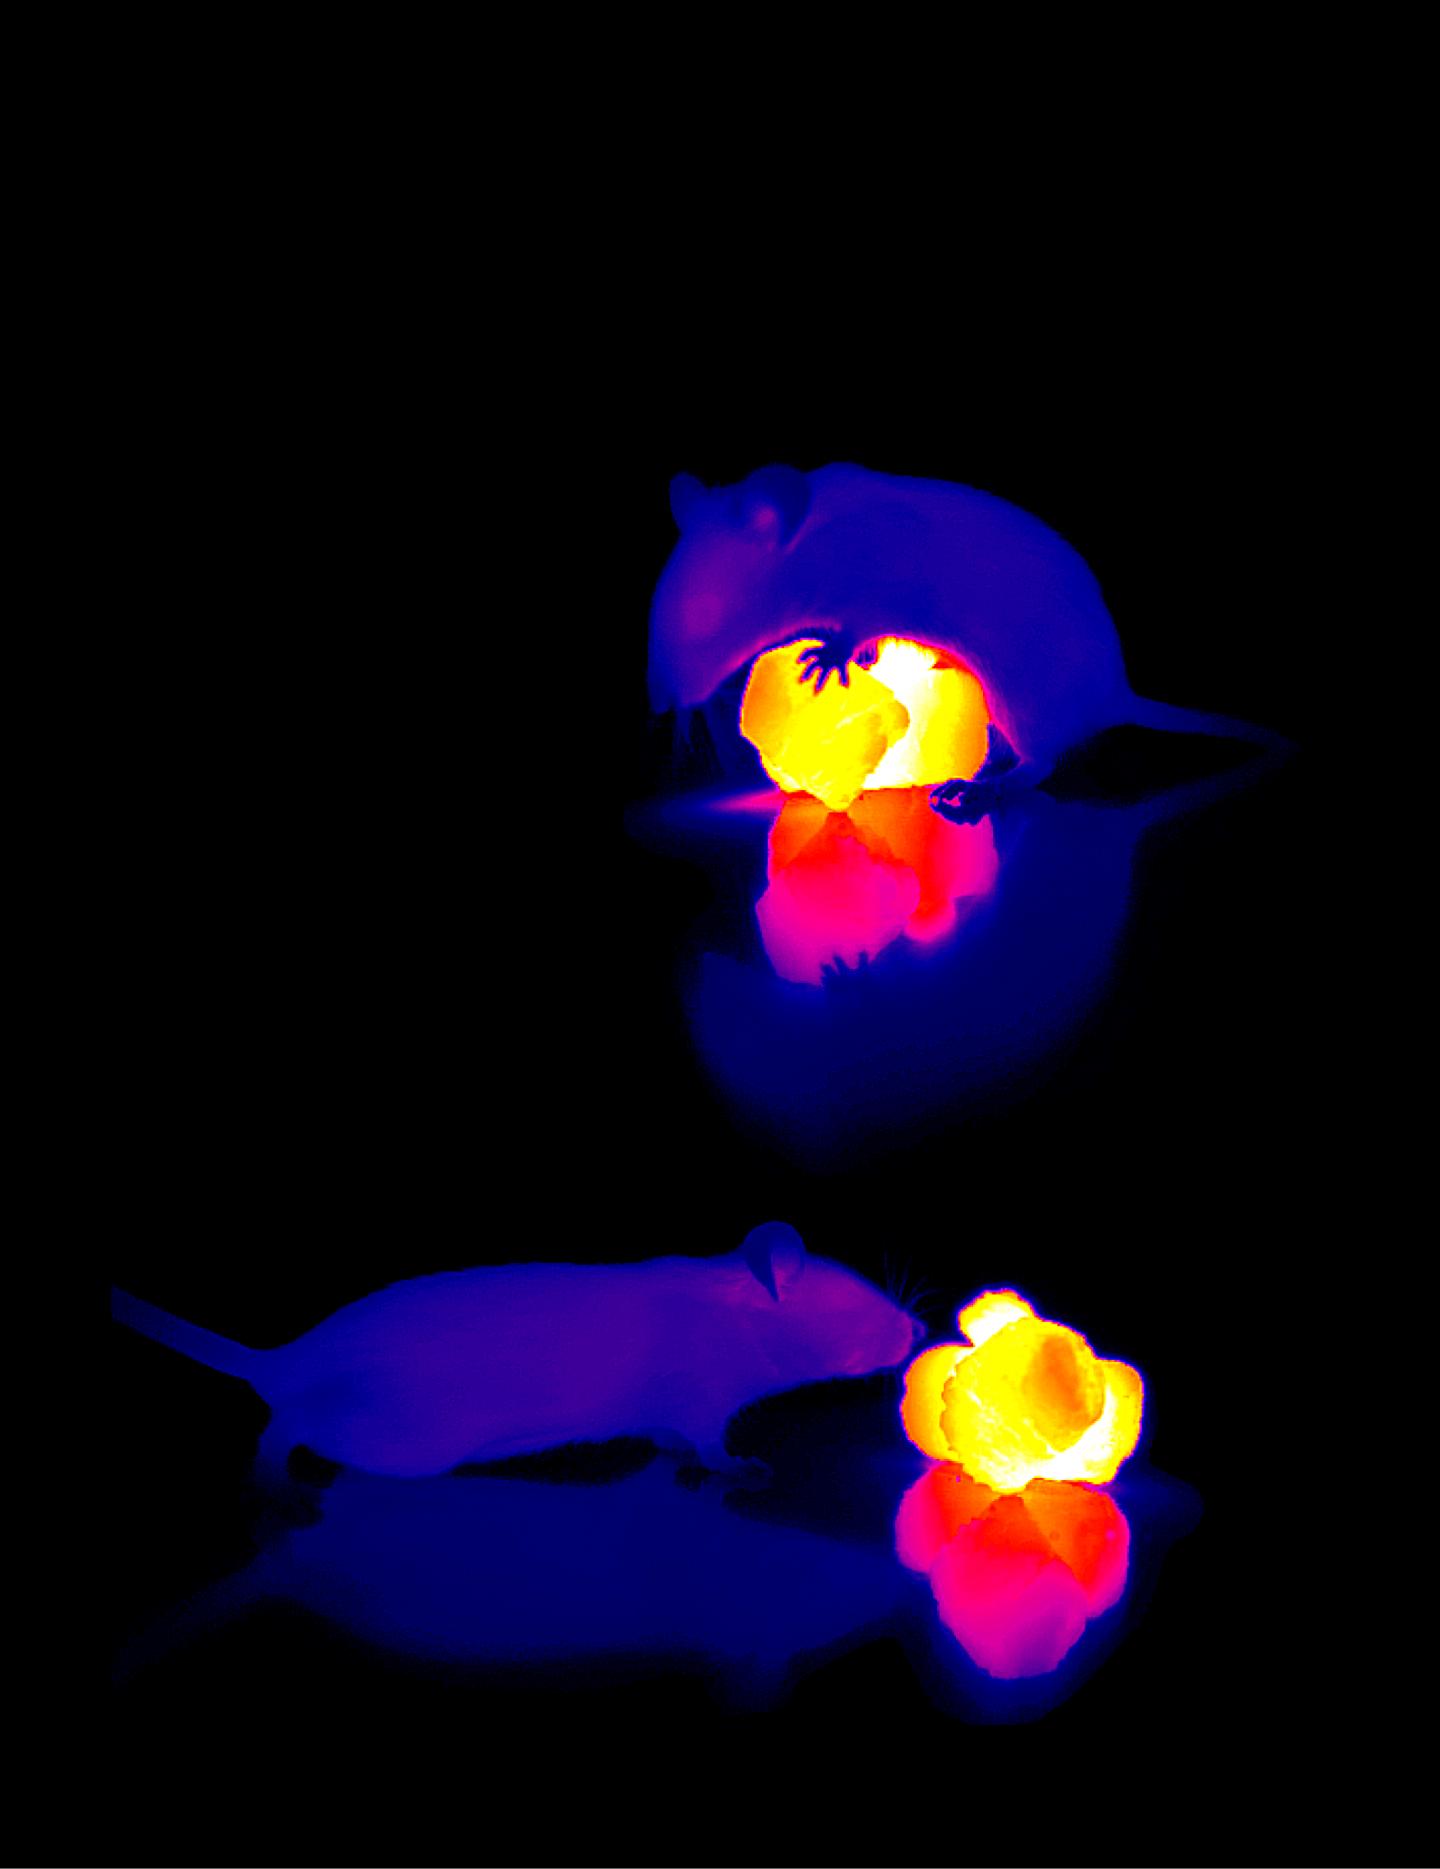 Infrared (thermal) Imaging: Mice